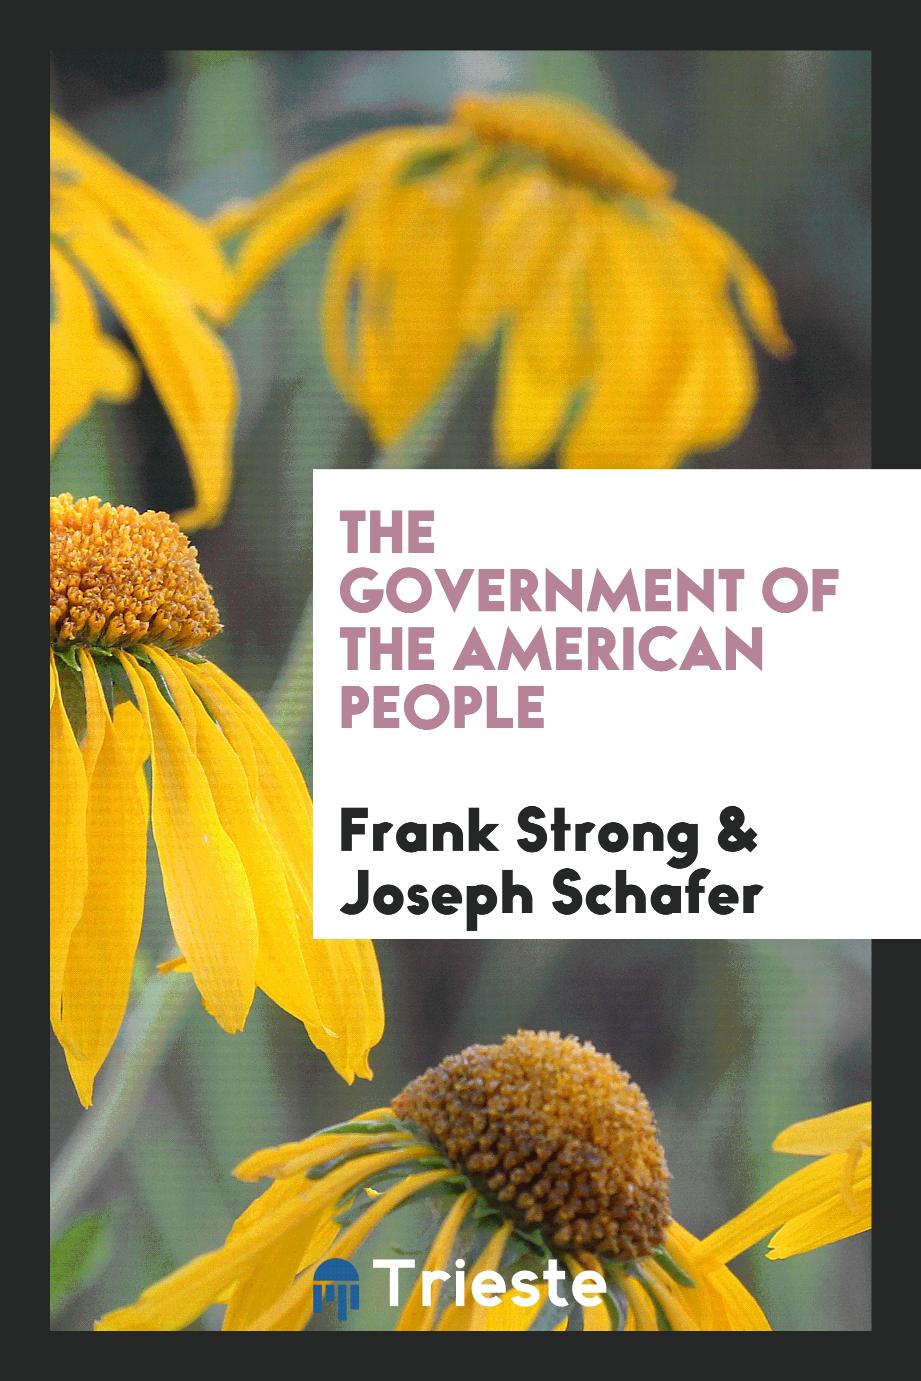 The government of the American people